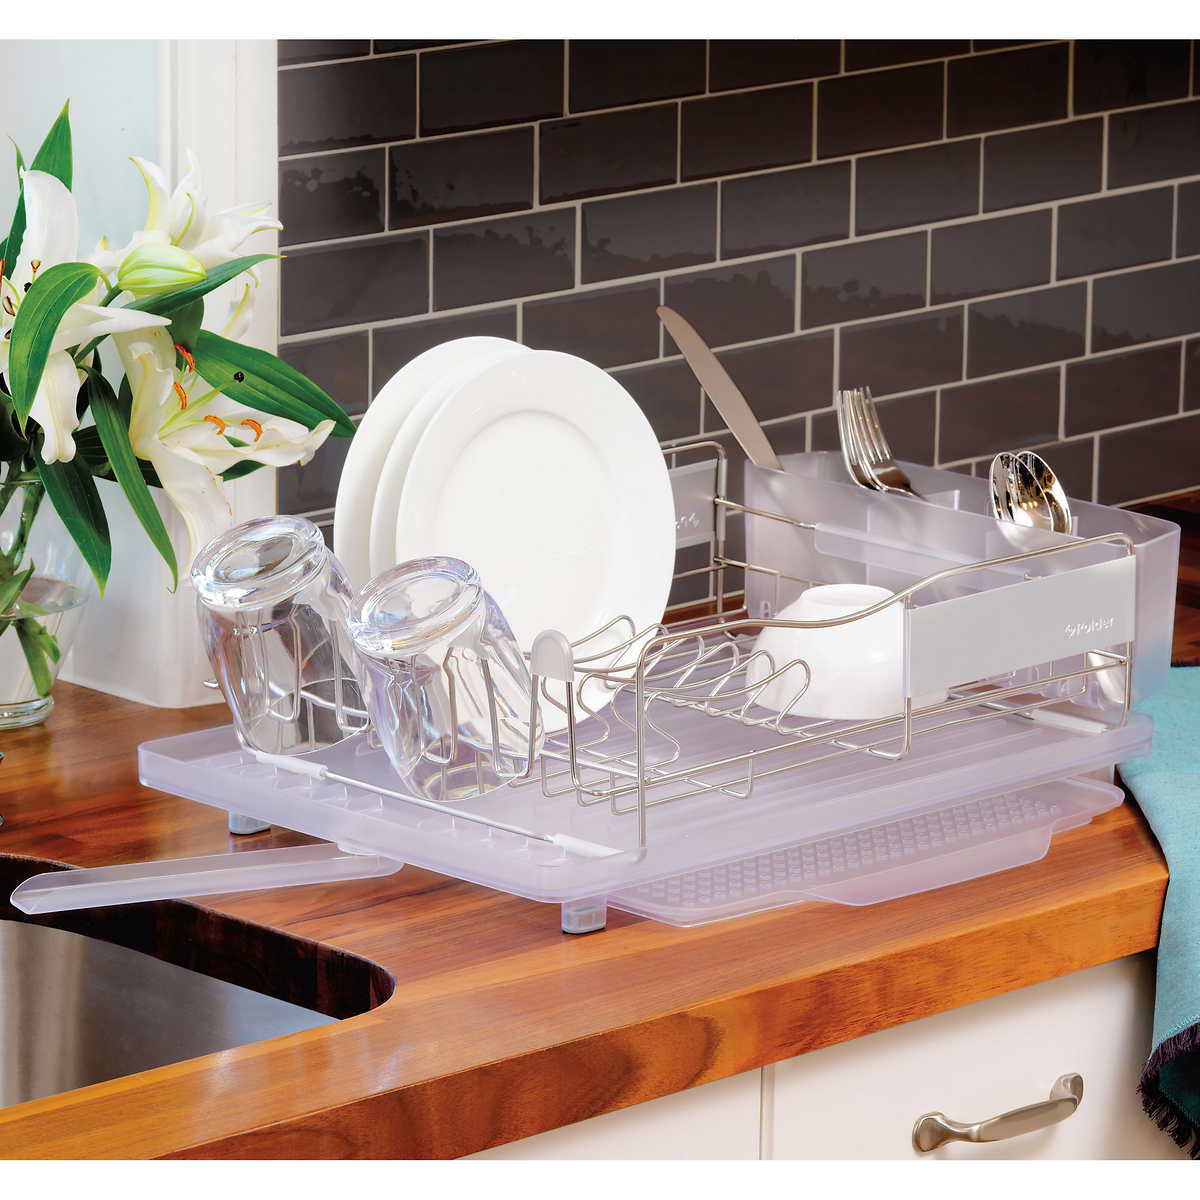 Adjustable divider and drying rack for the sink